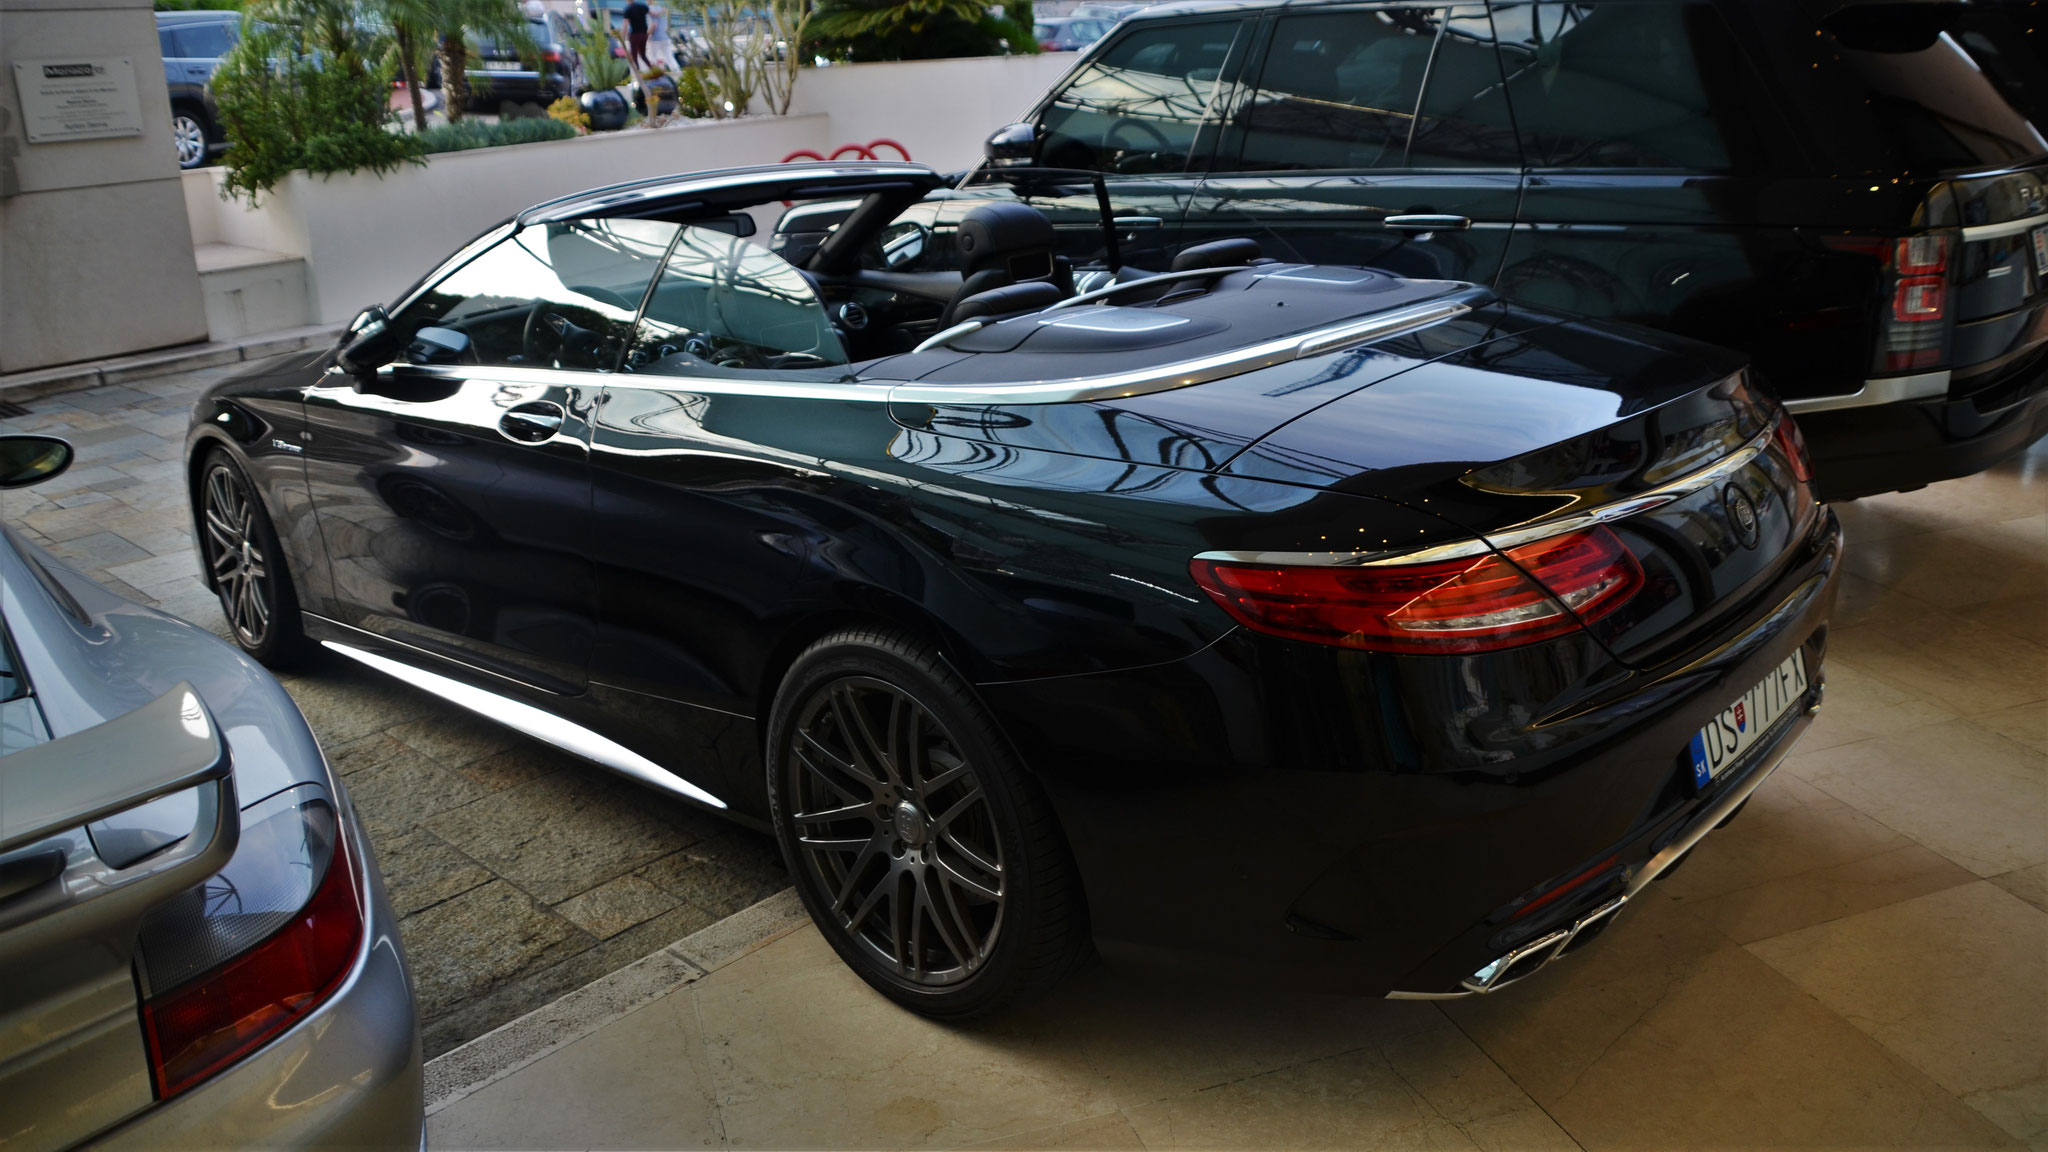 Brabus S63 Cabriolet - DS777FX (SK)